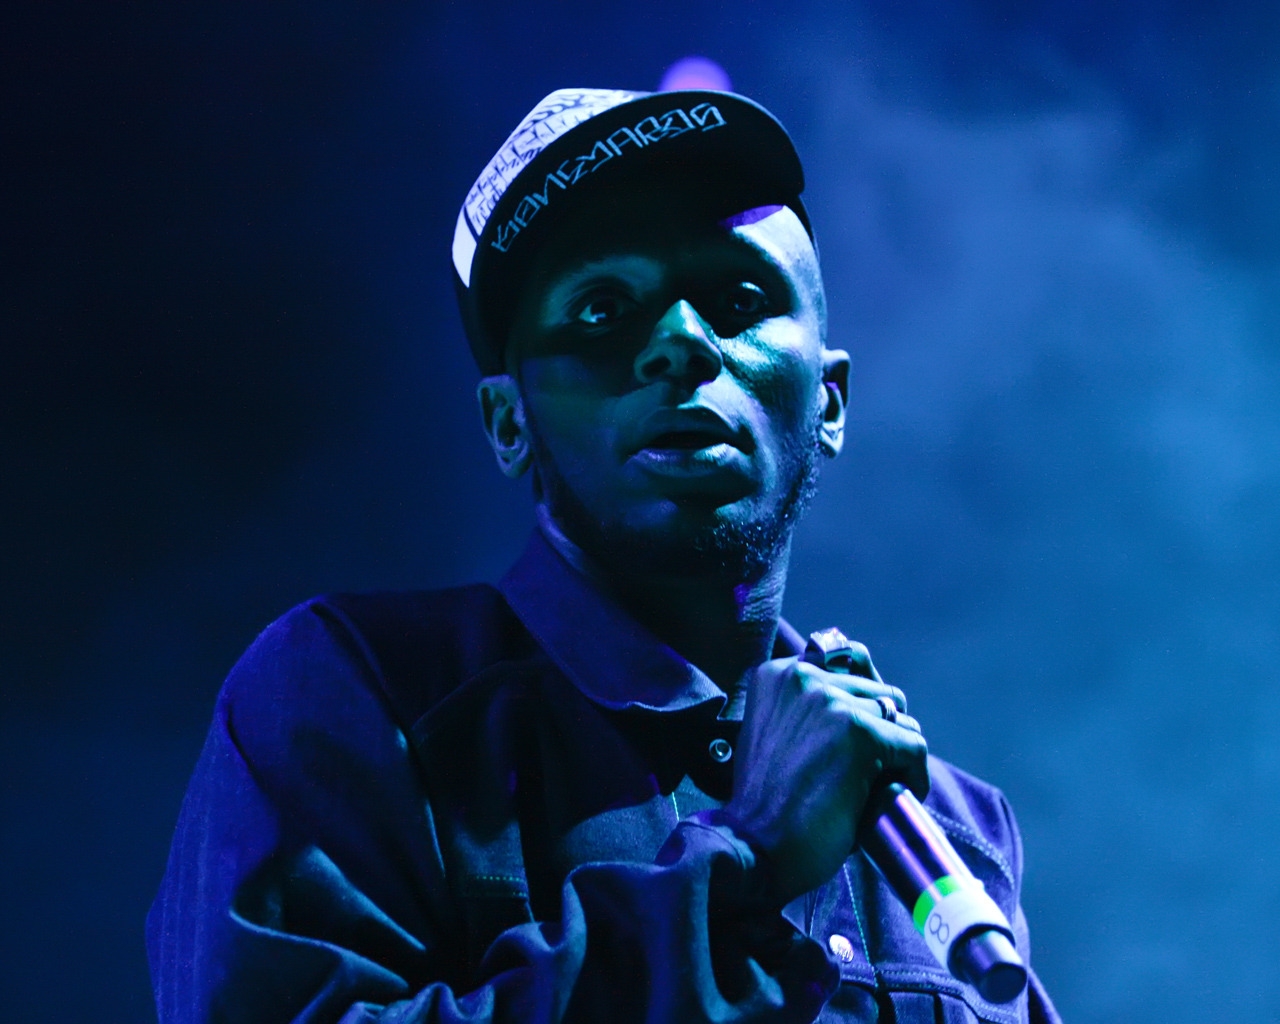 Mos Def for 1280 x 1024 resolution